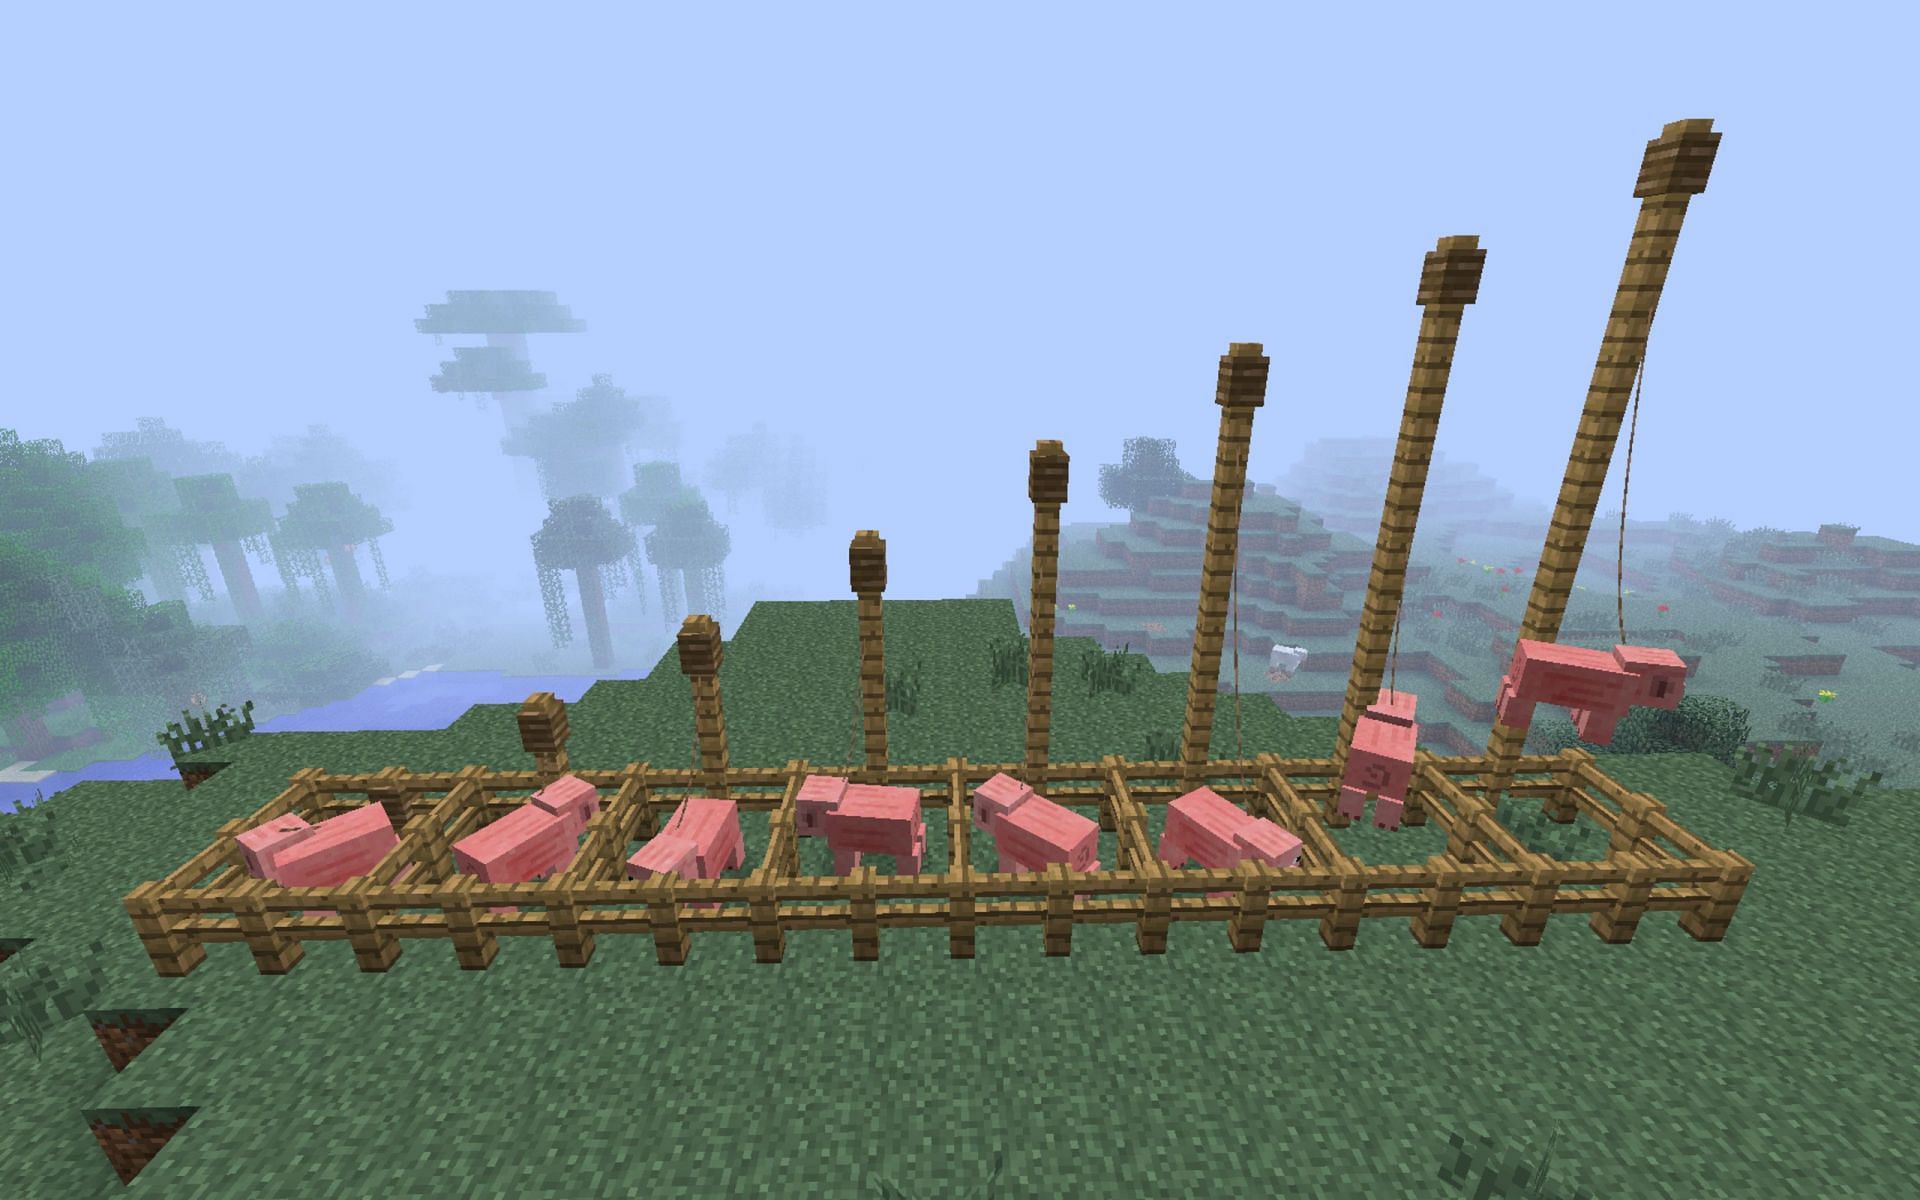 Pigs being tied by leads at various heights (Image via Mojang)